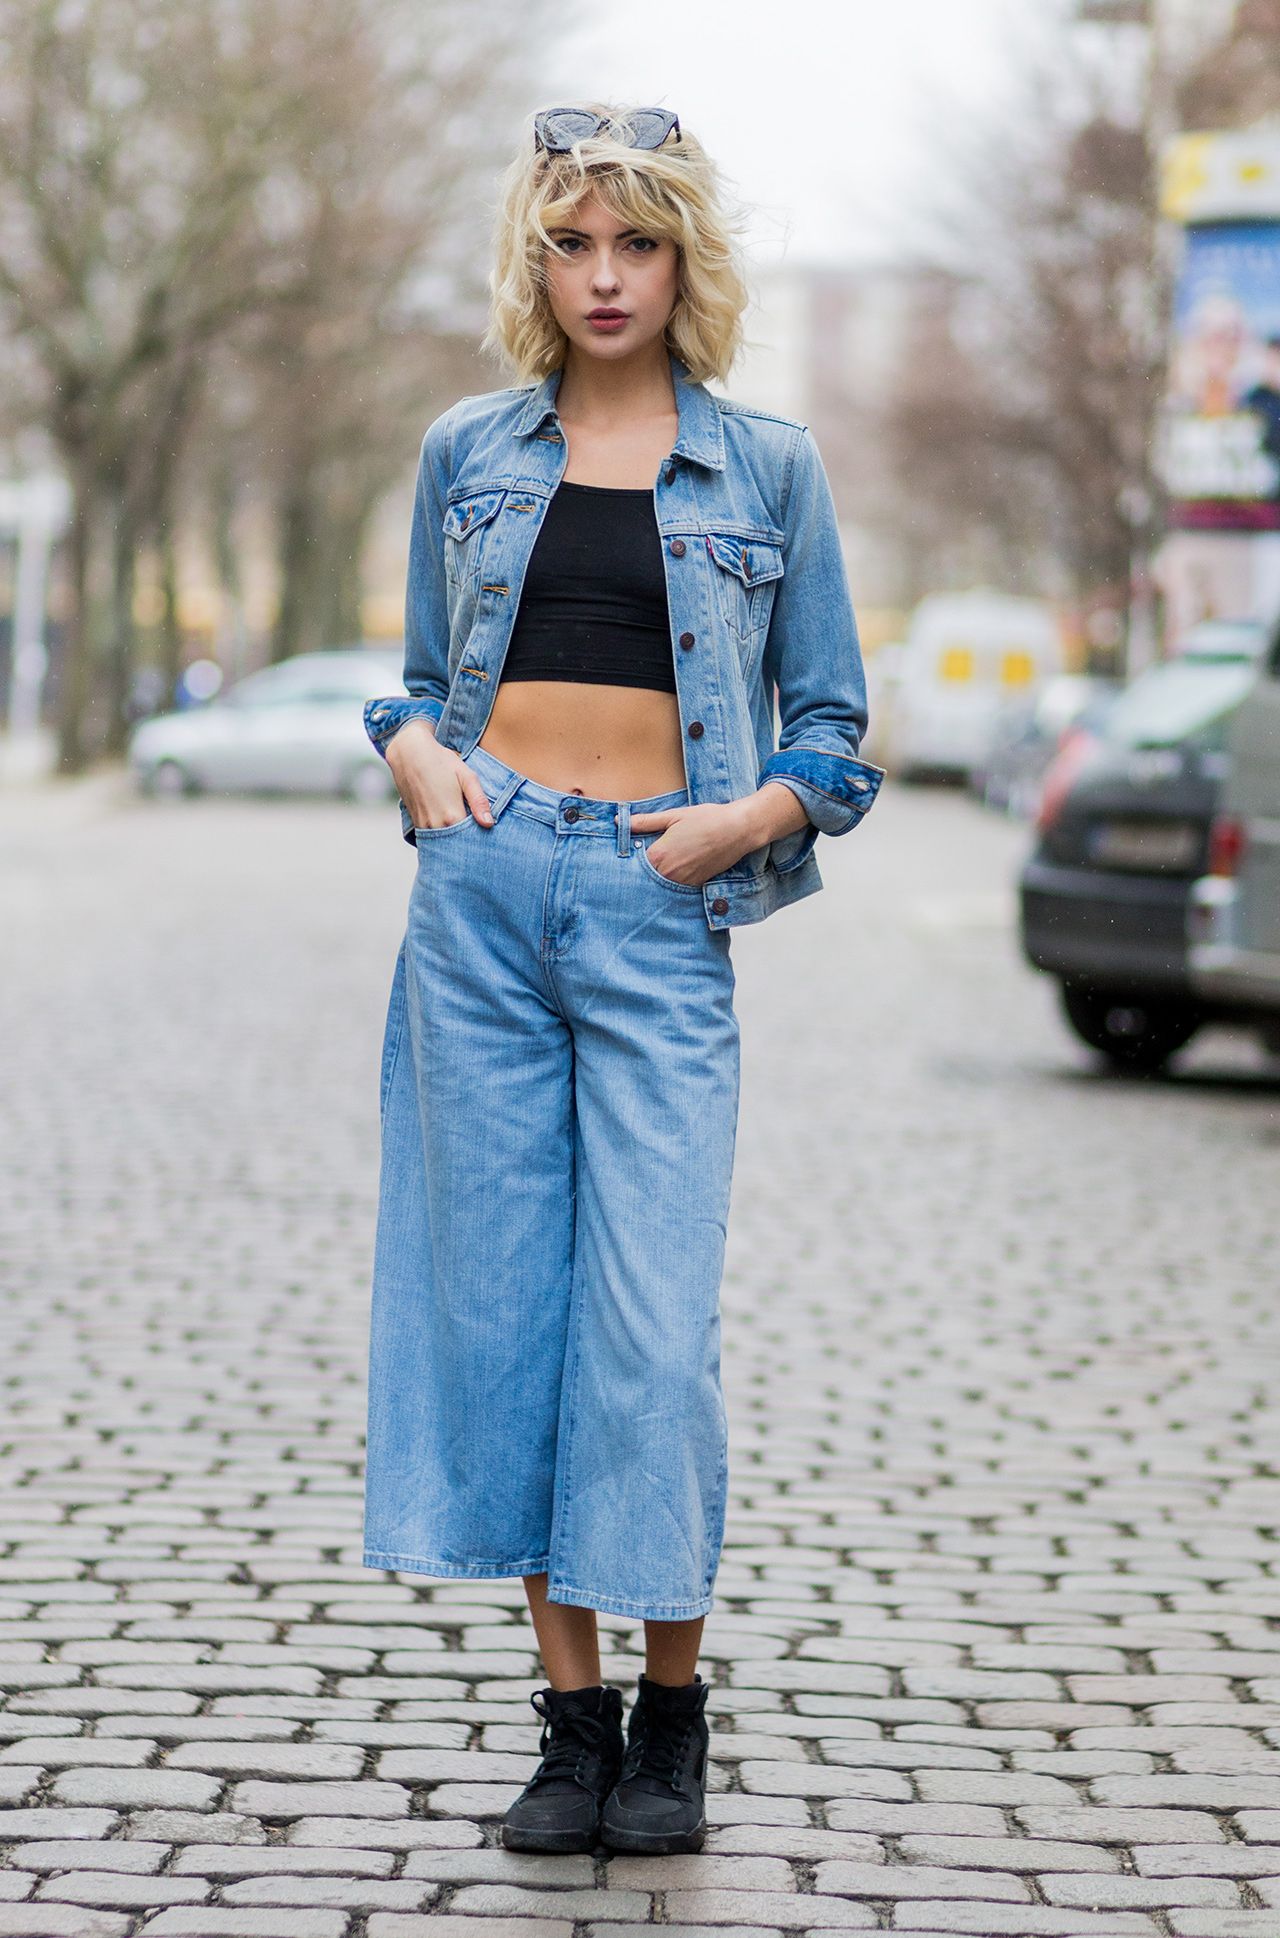 Wearing double denim has gone from rule-breaking to standard behaviour. Try  wide culottes and a classic jean jacket like this street-styler.